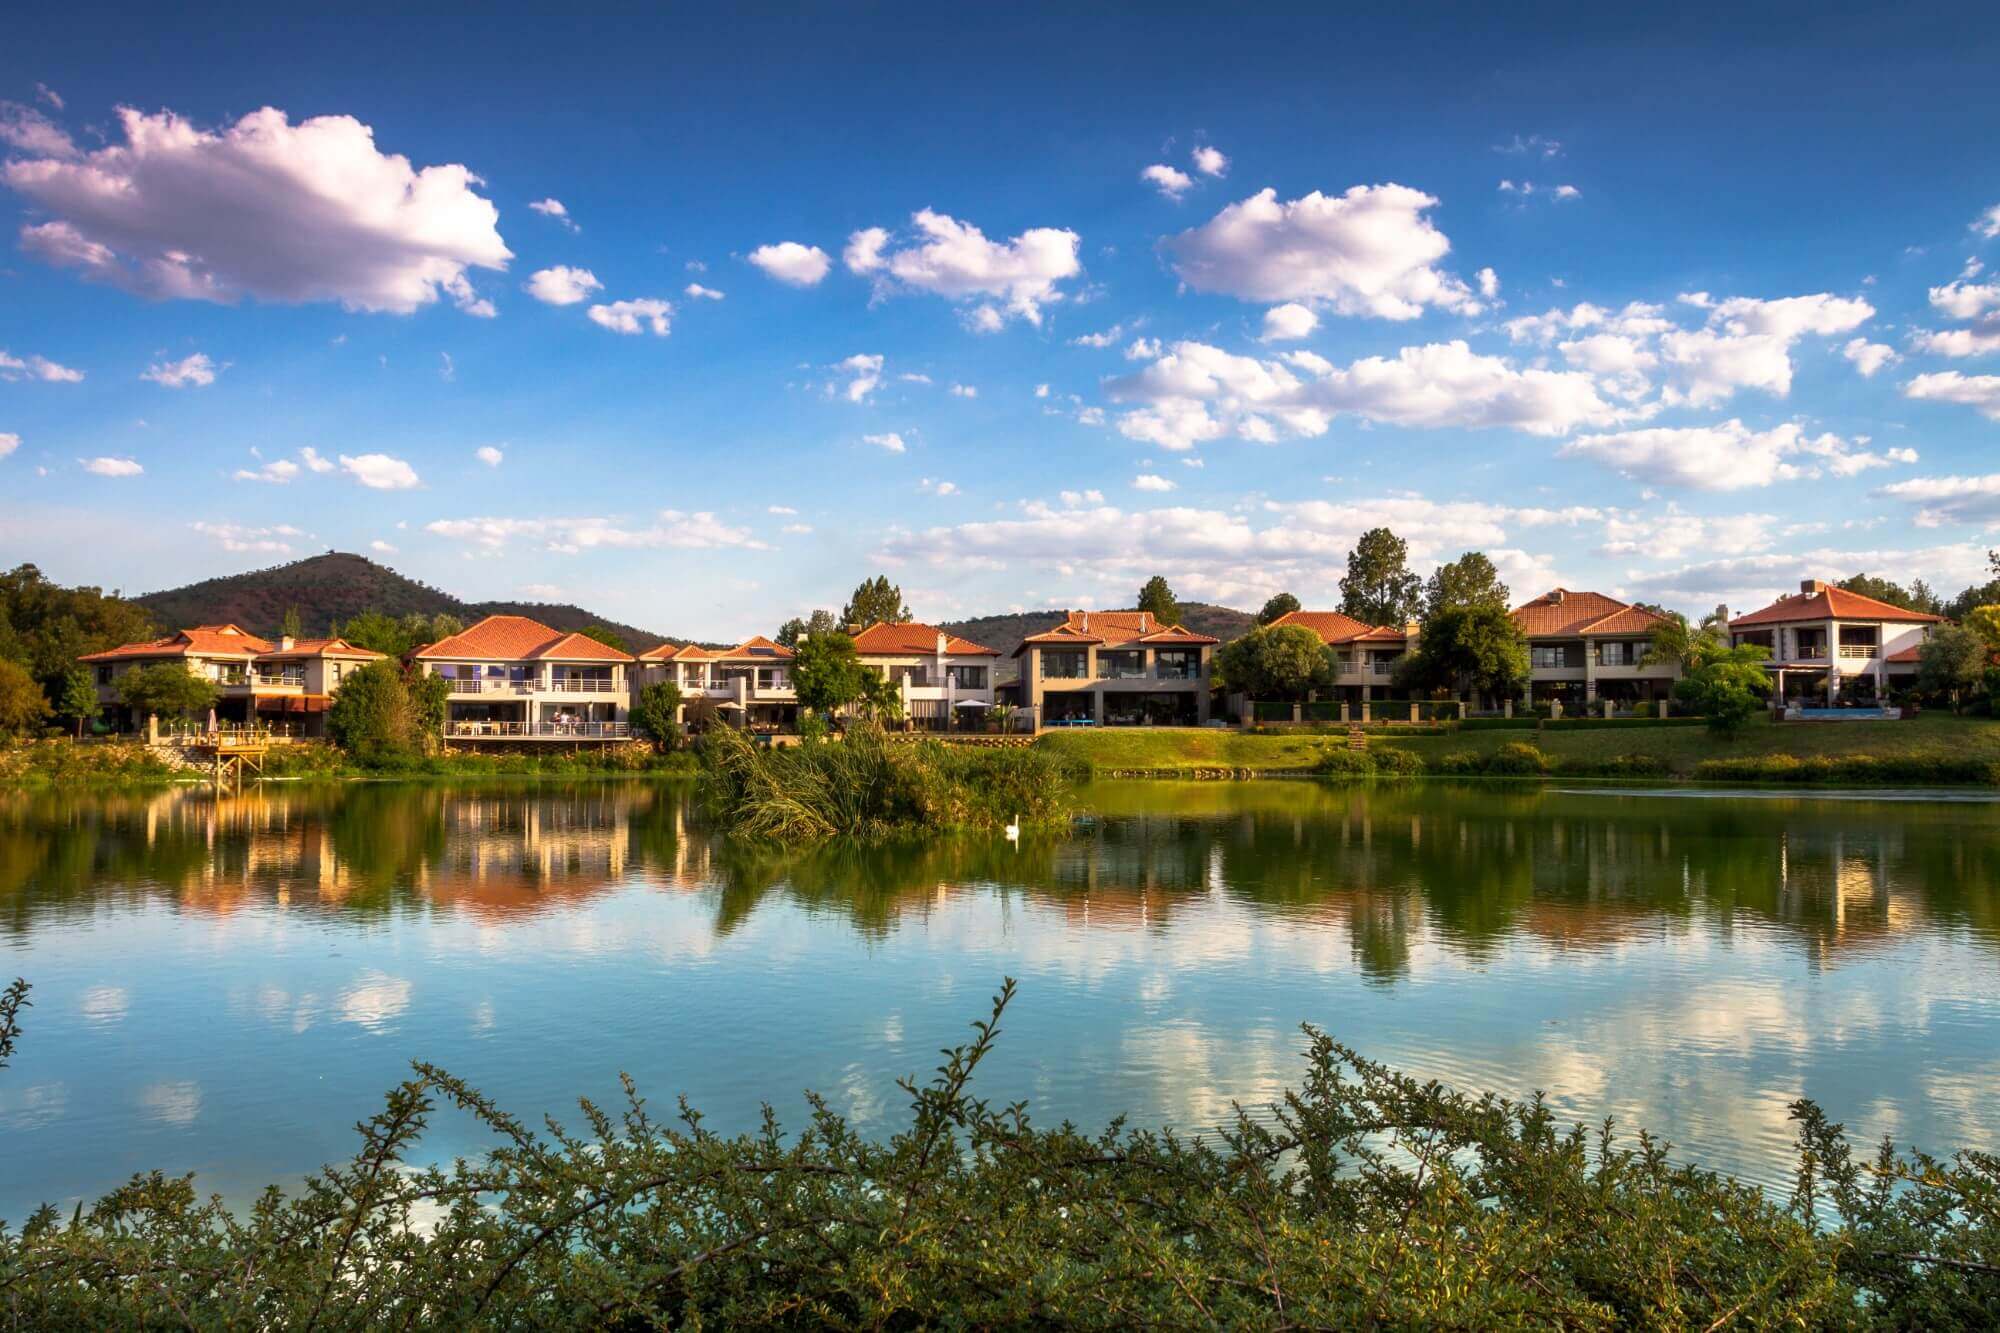 With over 800 luxury homes, a world-class golf course, a small-craft harbour, a country club including tennis courts and swimming pools, and three restaurant areas, Pecanwood Estate has already established itself as one of South Africa’s premier residential estates.